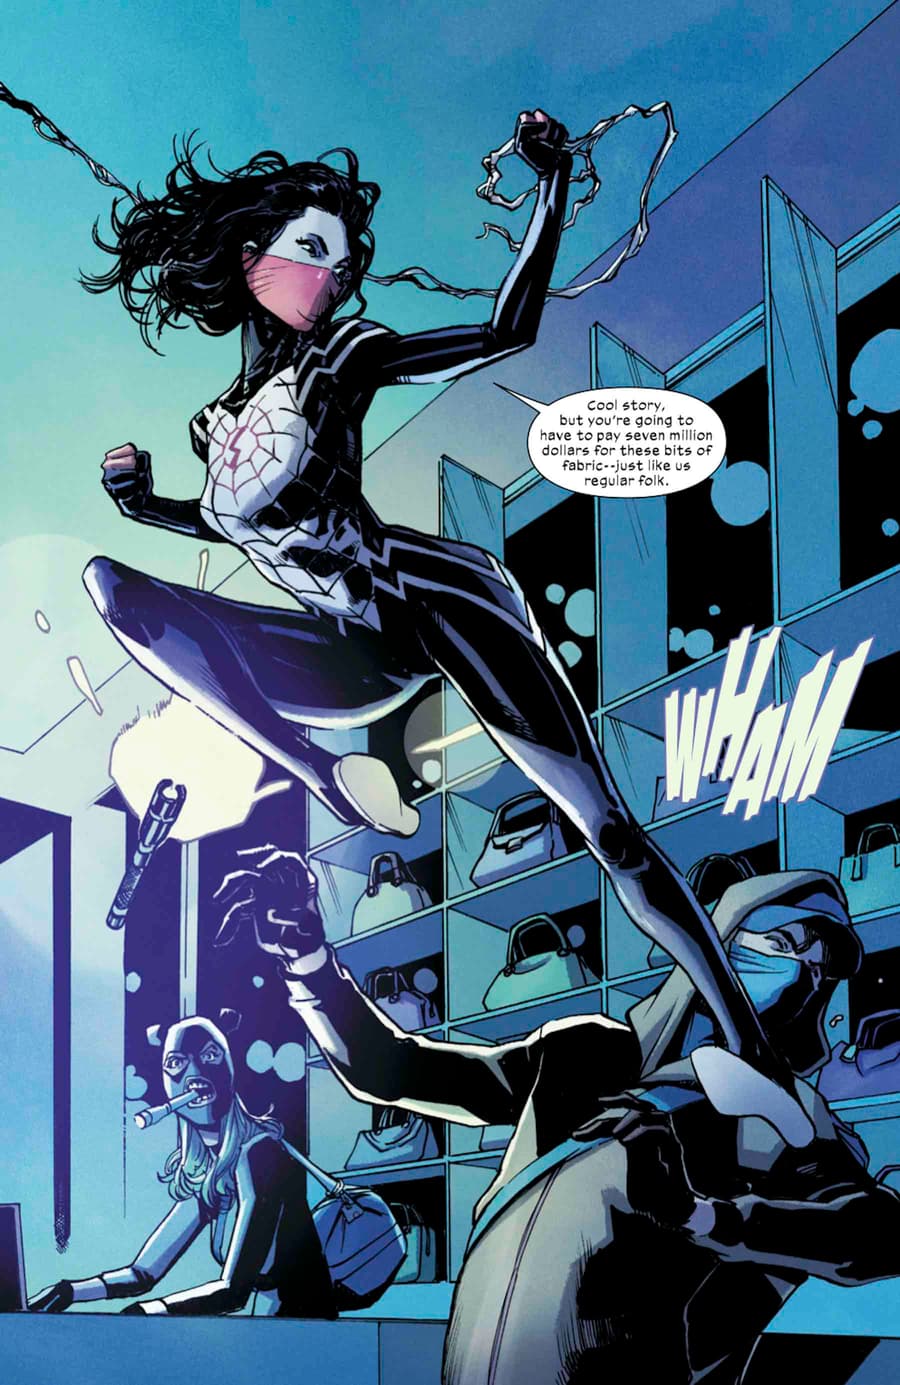 SILK #1 preview art by Takeshi Miyazawa with colors by Ian Herring